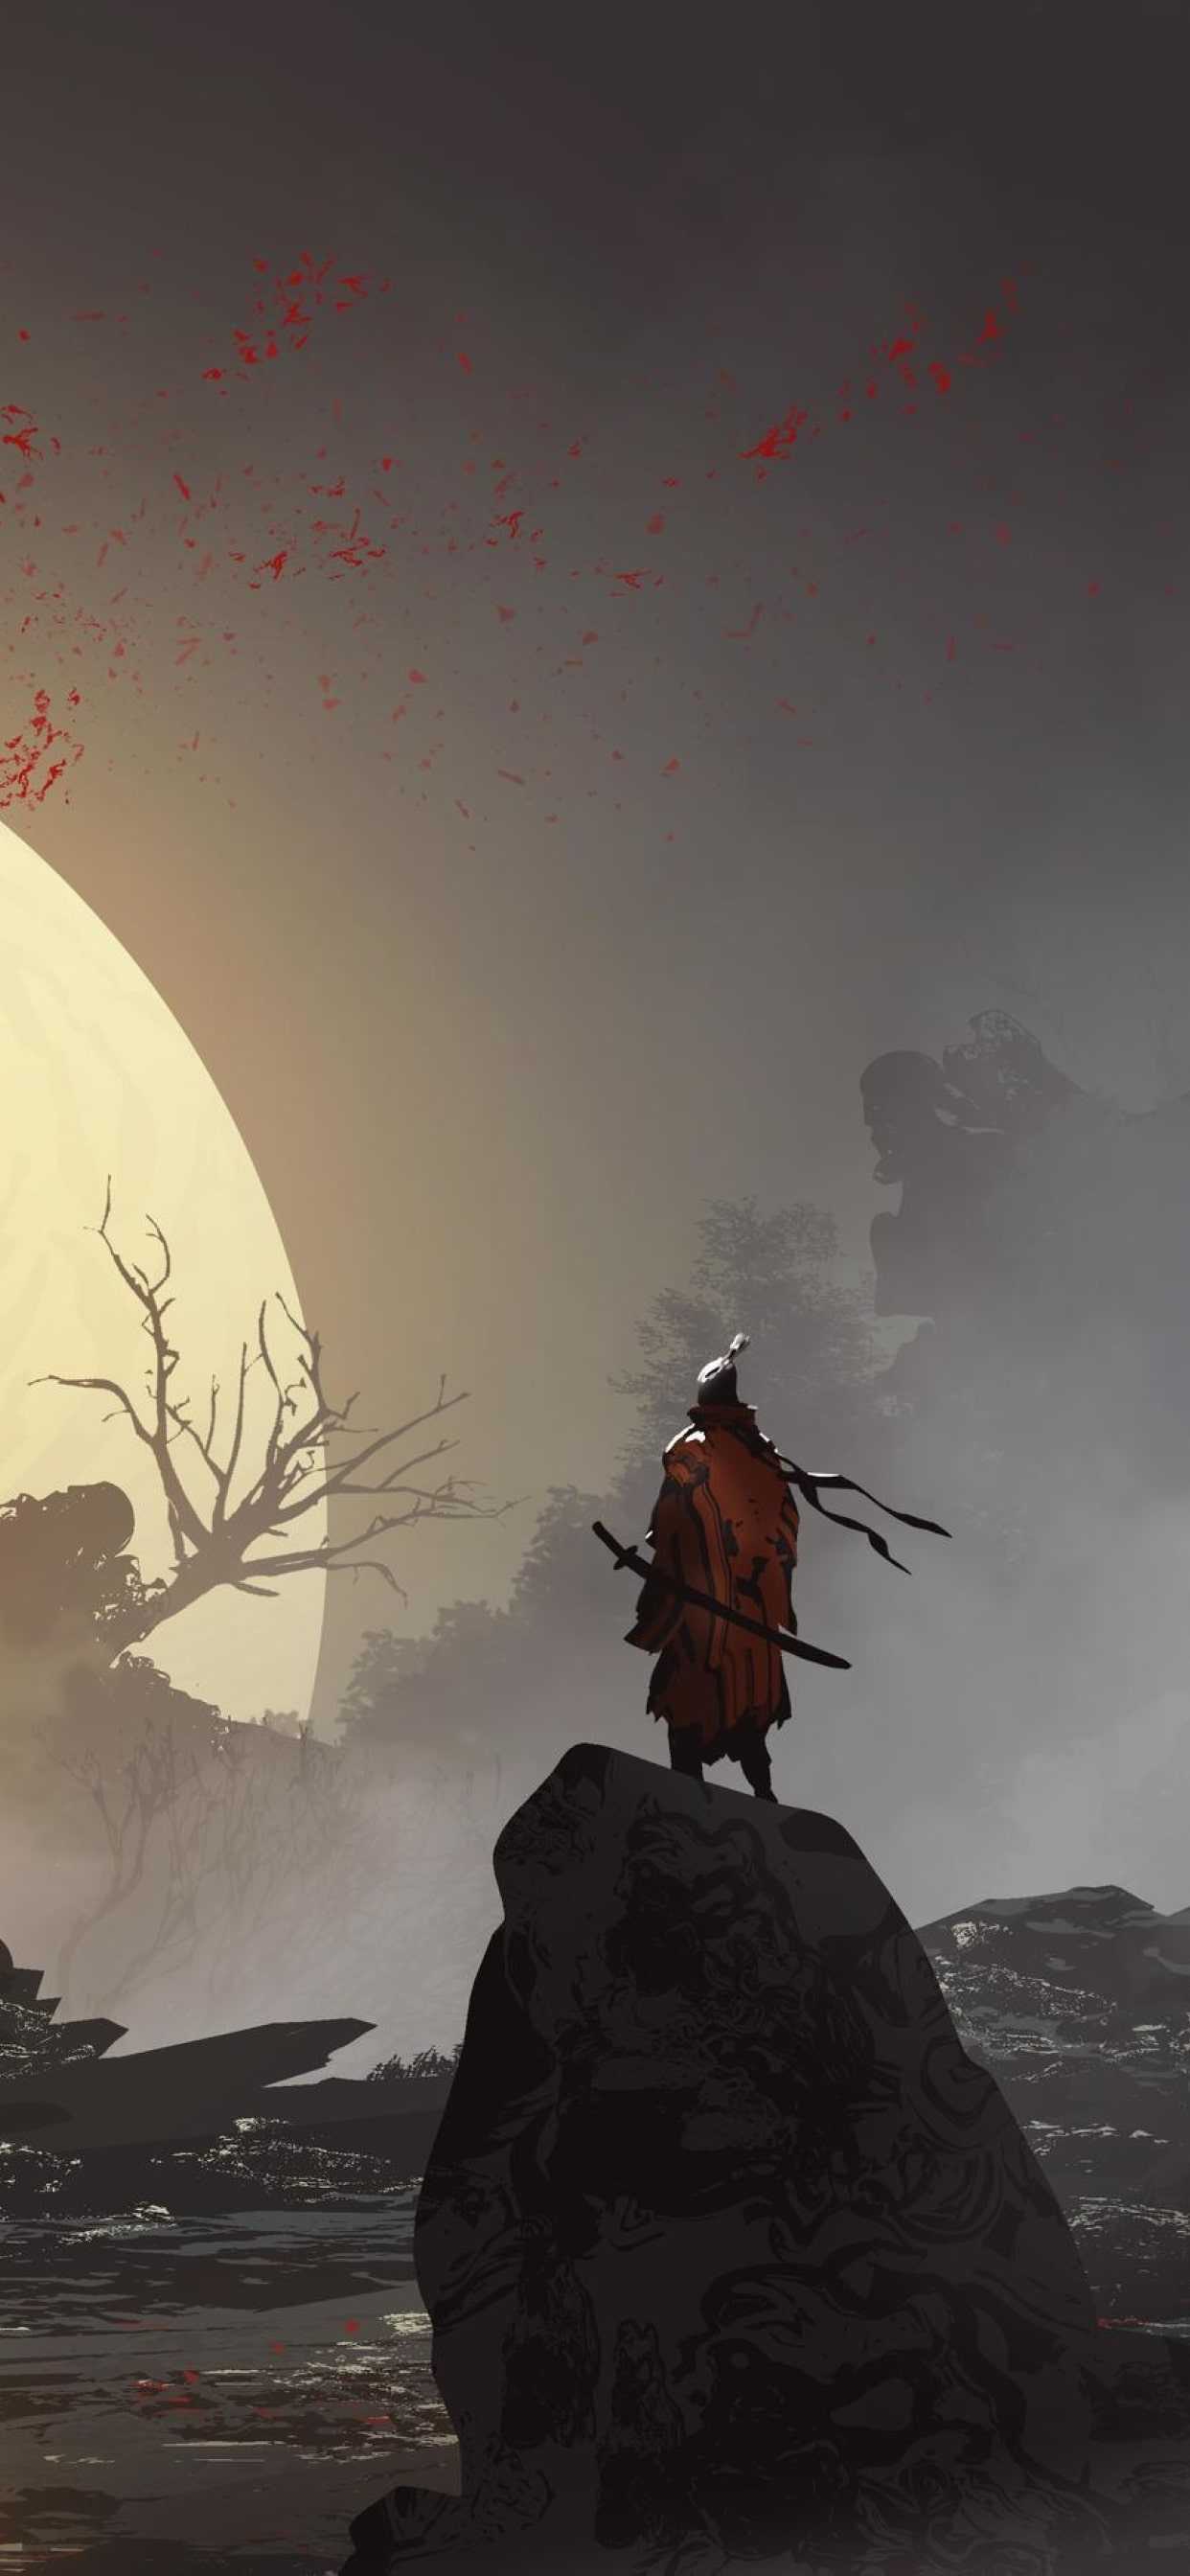 A man in red standing on top of rocks with the moon behind him - Samurai